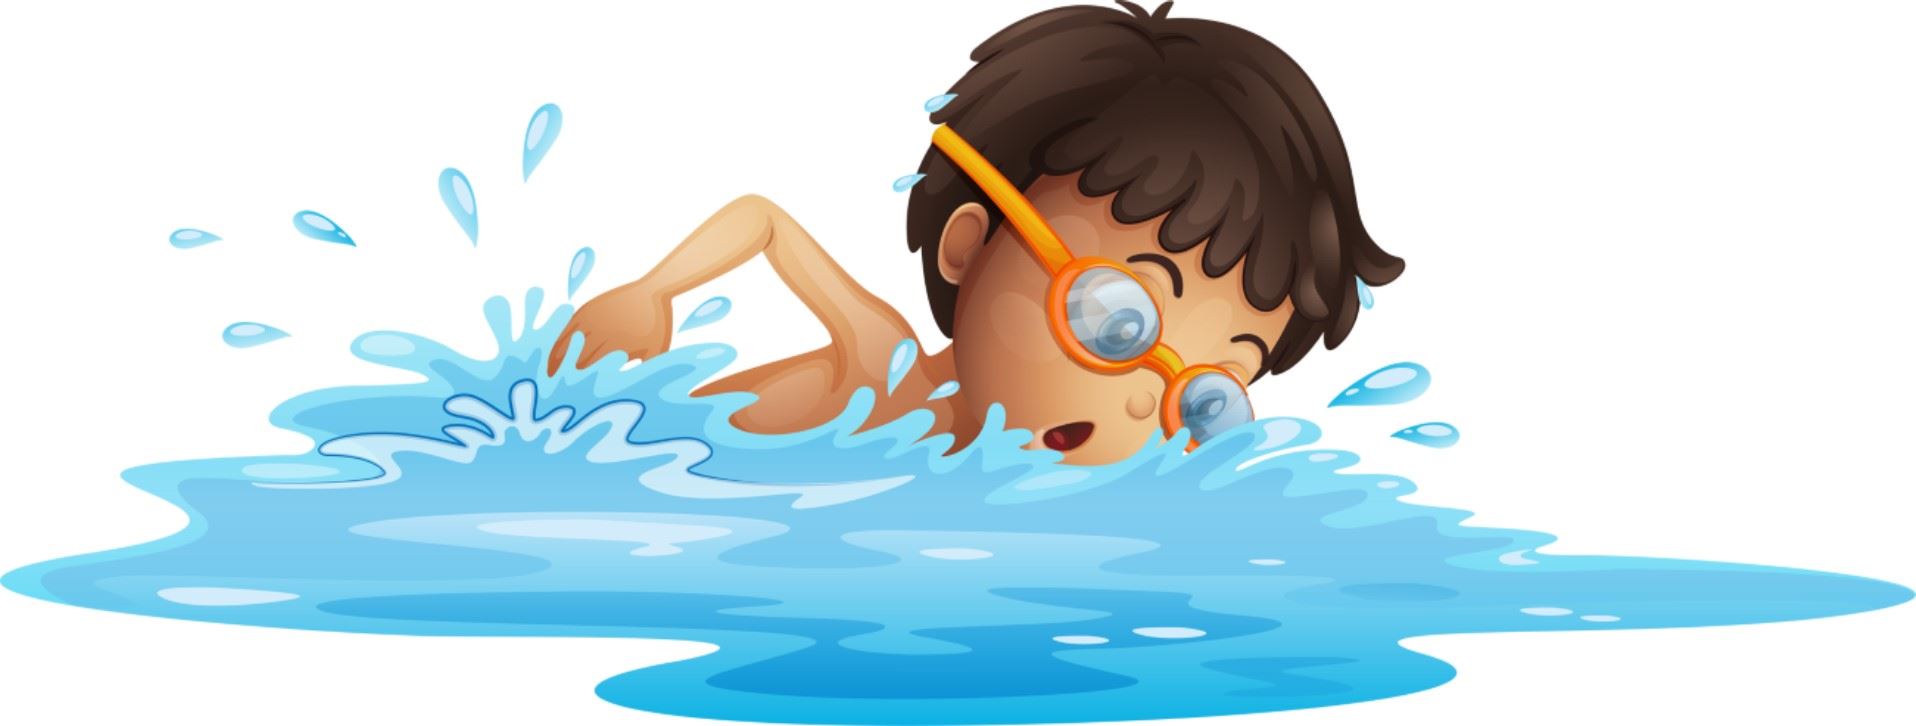 clipart swimming activity